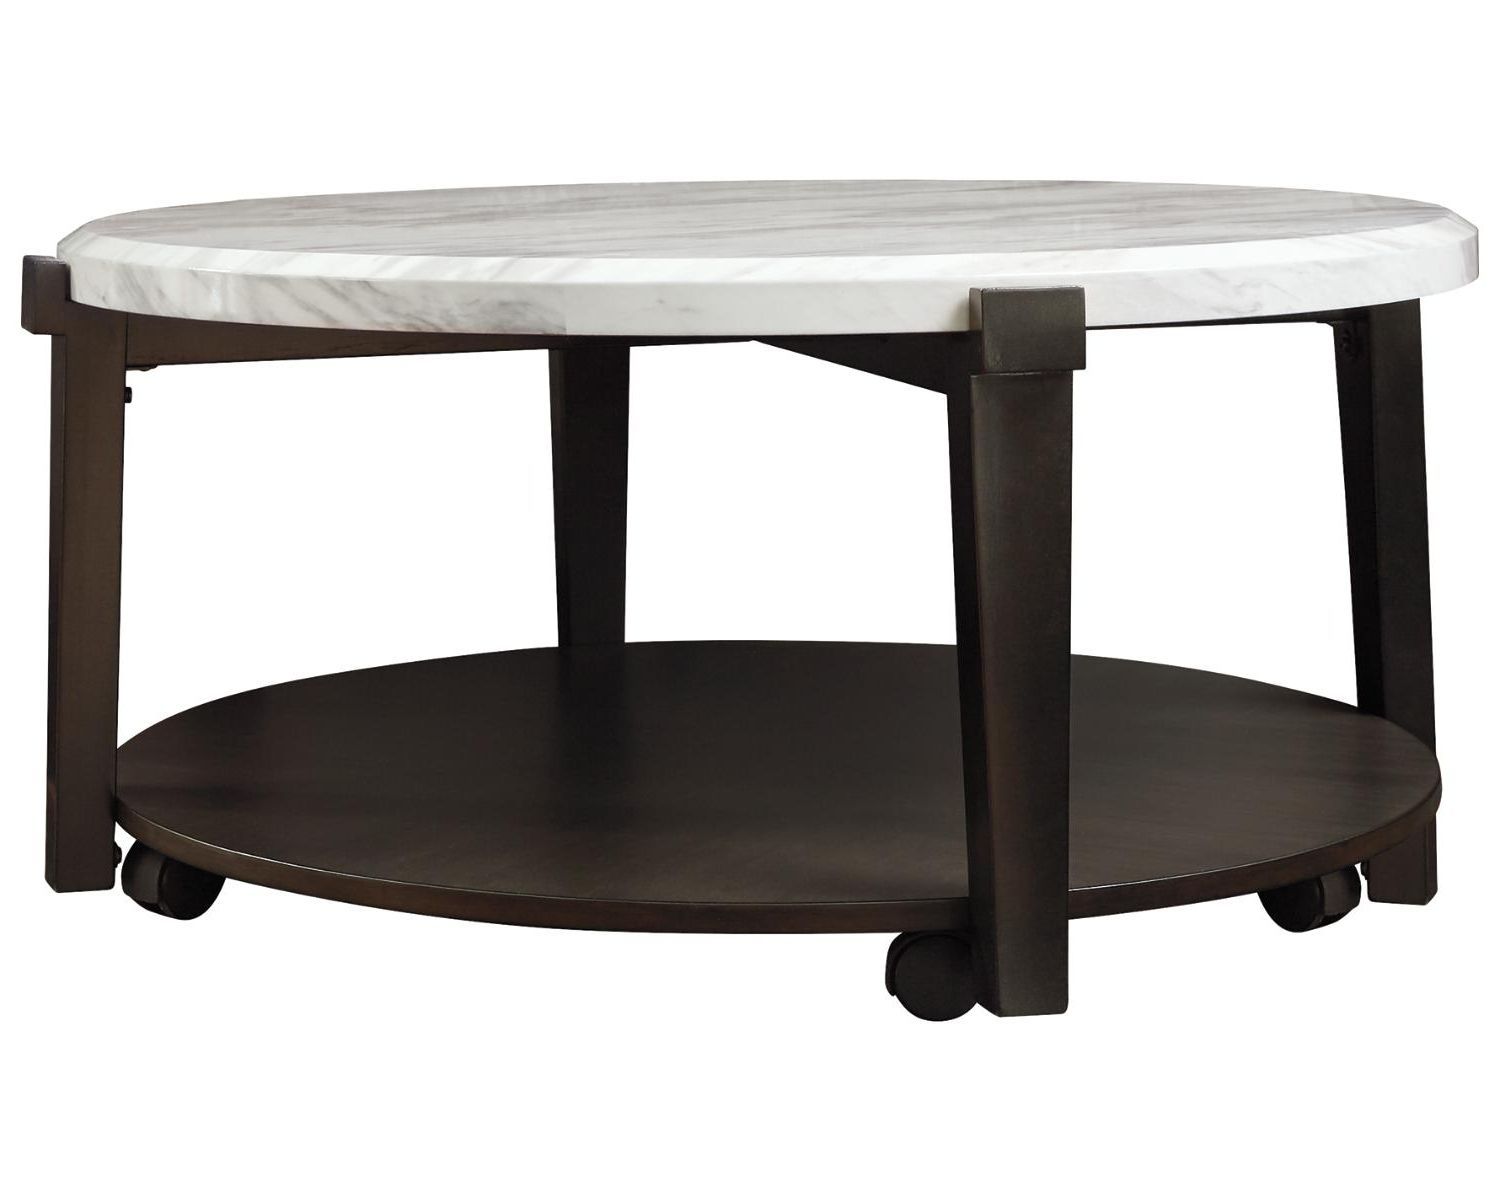 2019 Faux White Marble And Metal Coffee Tables In Signature Designashley Janilly Dark Brown Round (View 10 of 20)